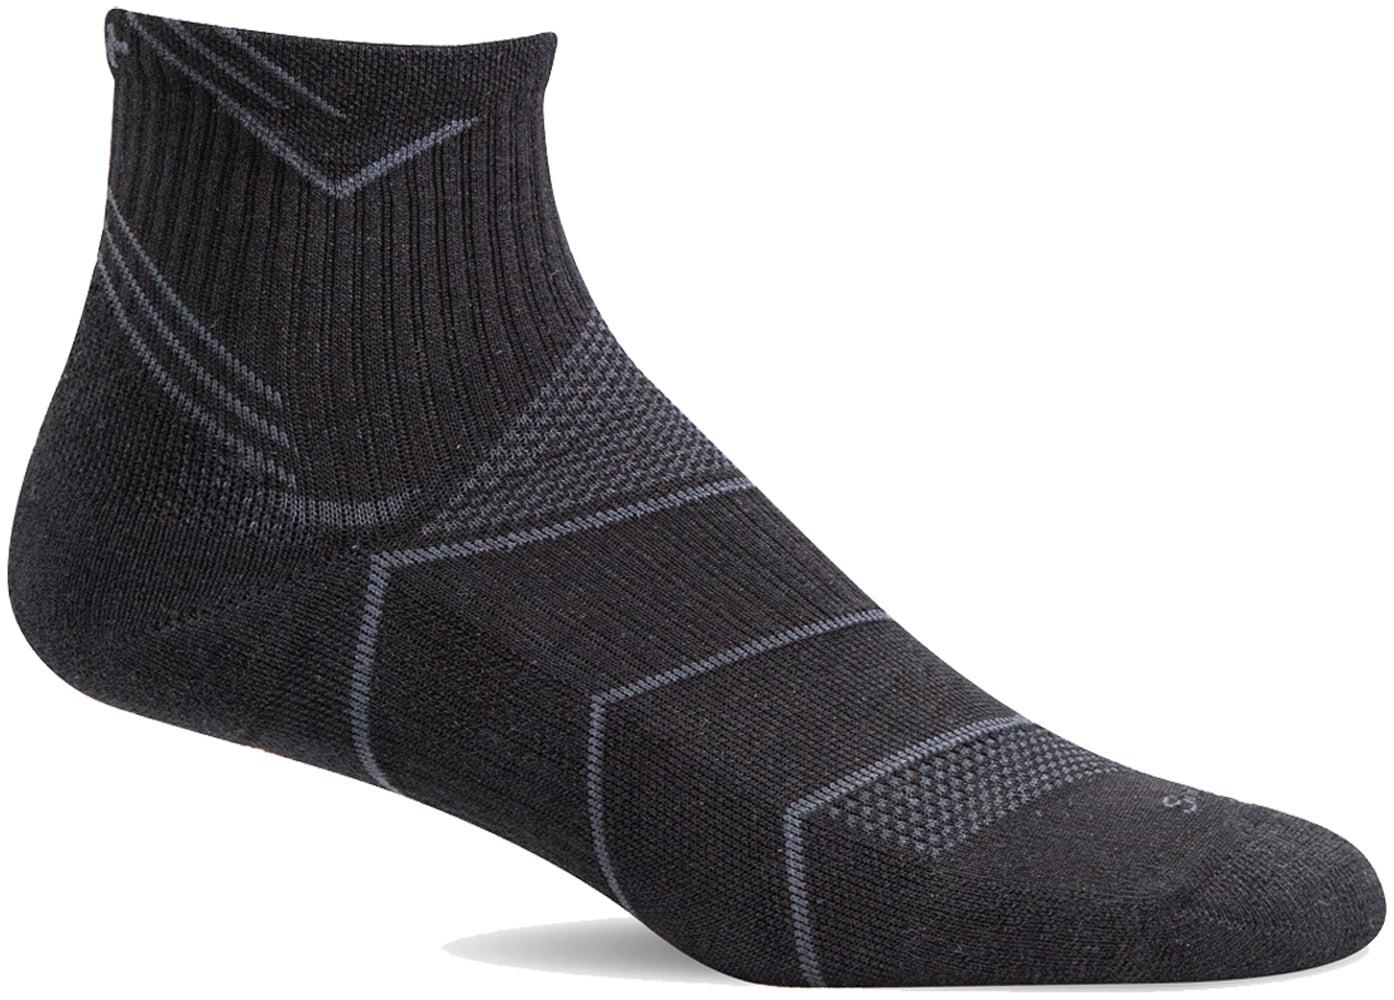 Sockwell Women's Incline Quarter Sock in Black Solid color from the side